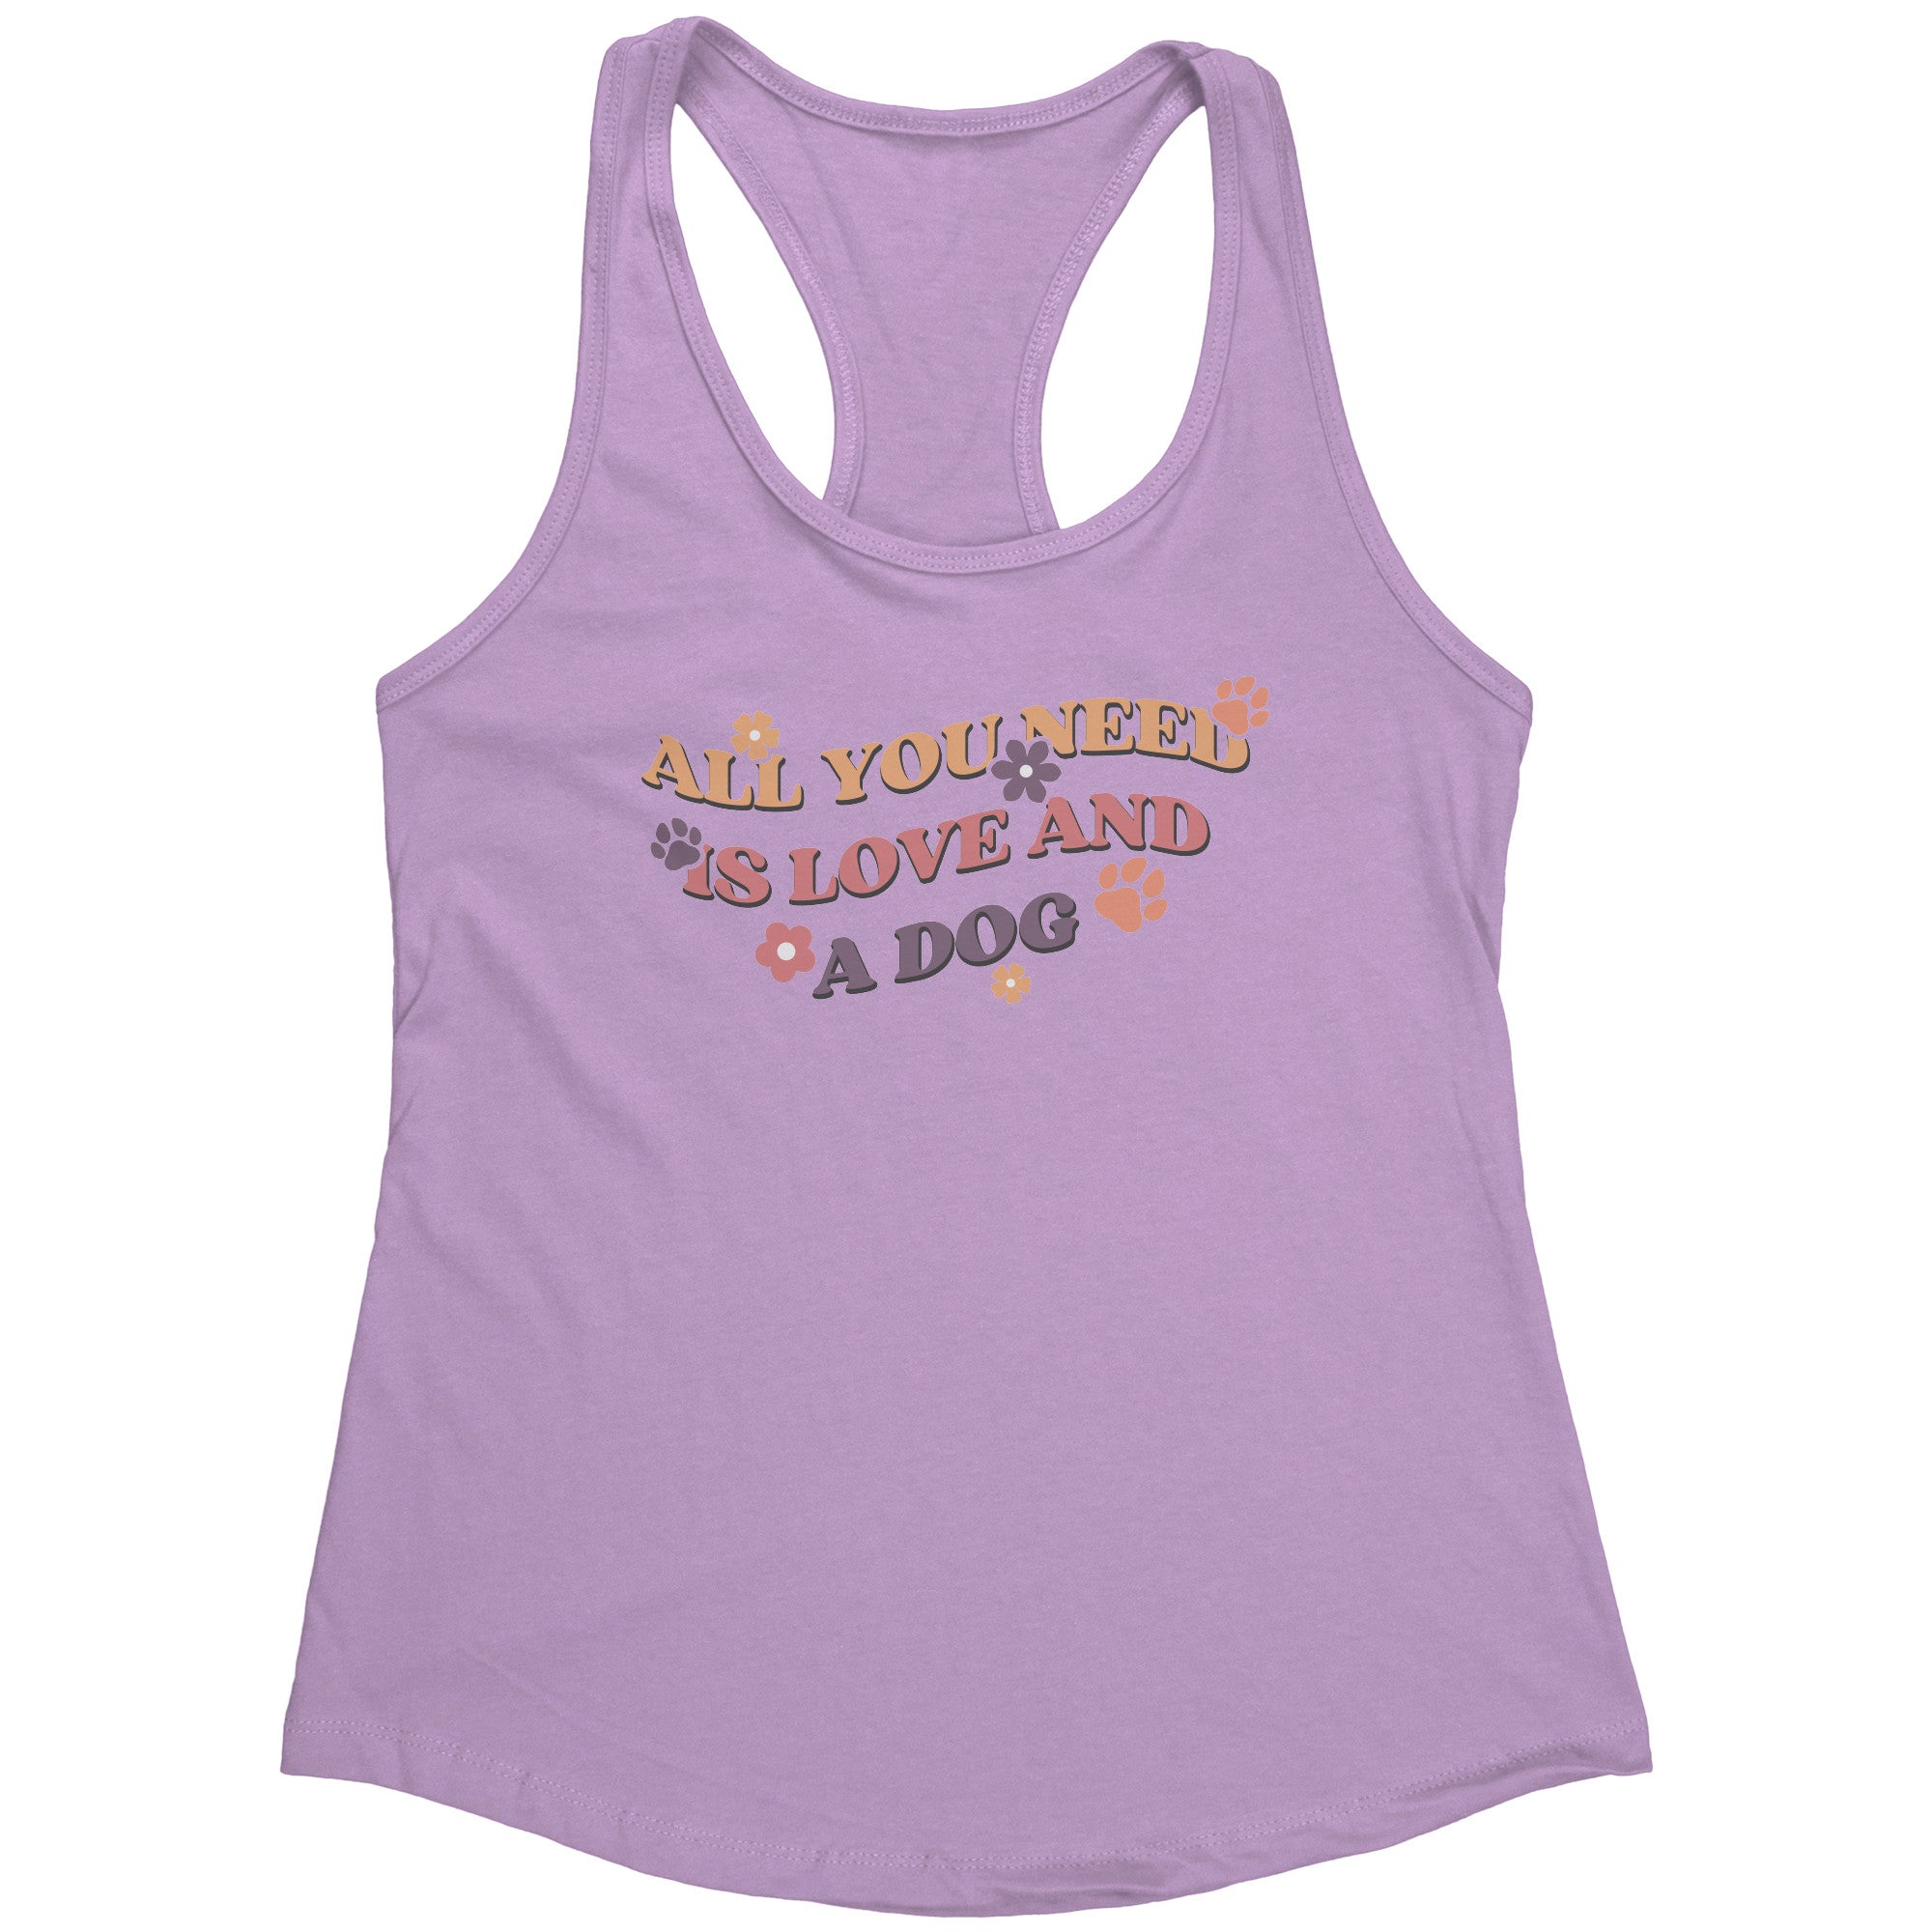 All You Need Is Love and a Dog T-shirt, tank, and long sleeve